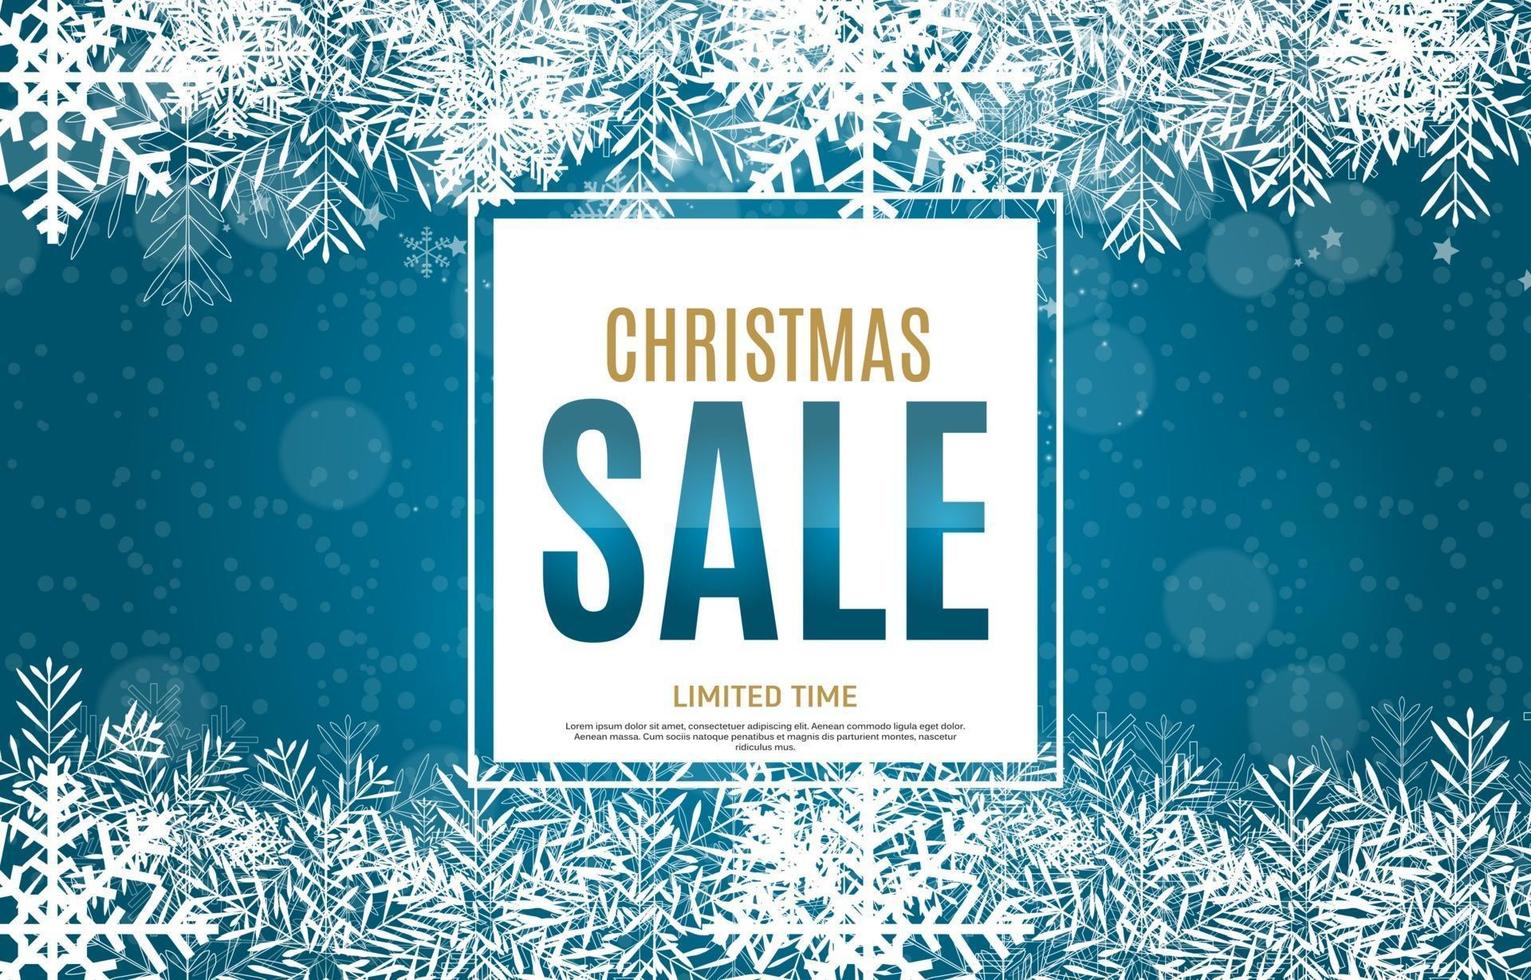 Christmas and New Year Sale Background, Discount Coupon Template. vector